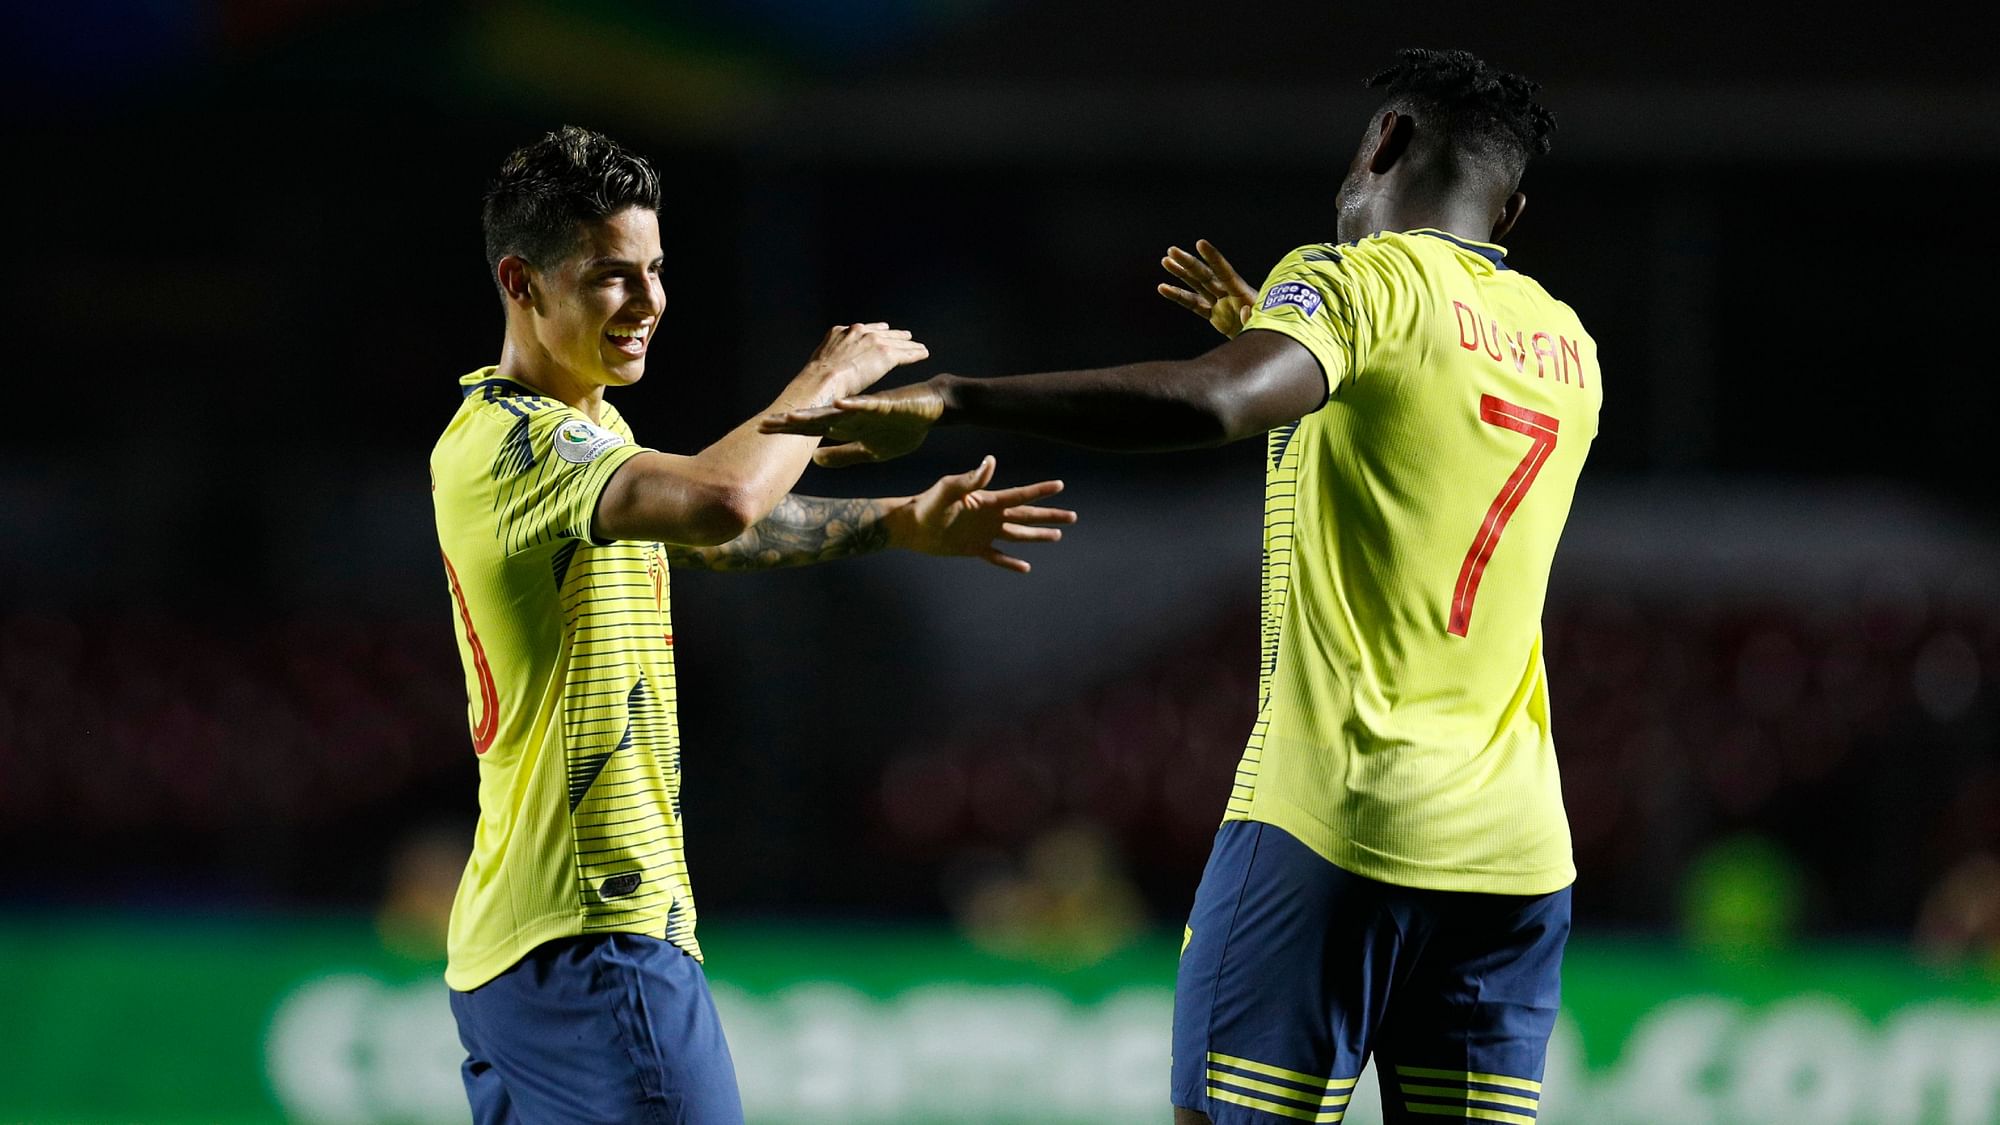 Colombia’s James Rodriguez applauds to fans at the end of a Copa America Group B soccer match at the Morumbi stadium in Sao Paulo, Brazil.